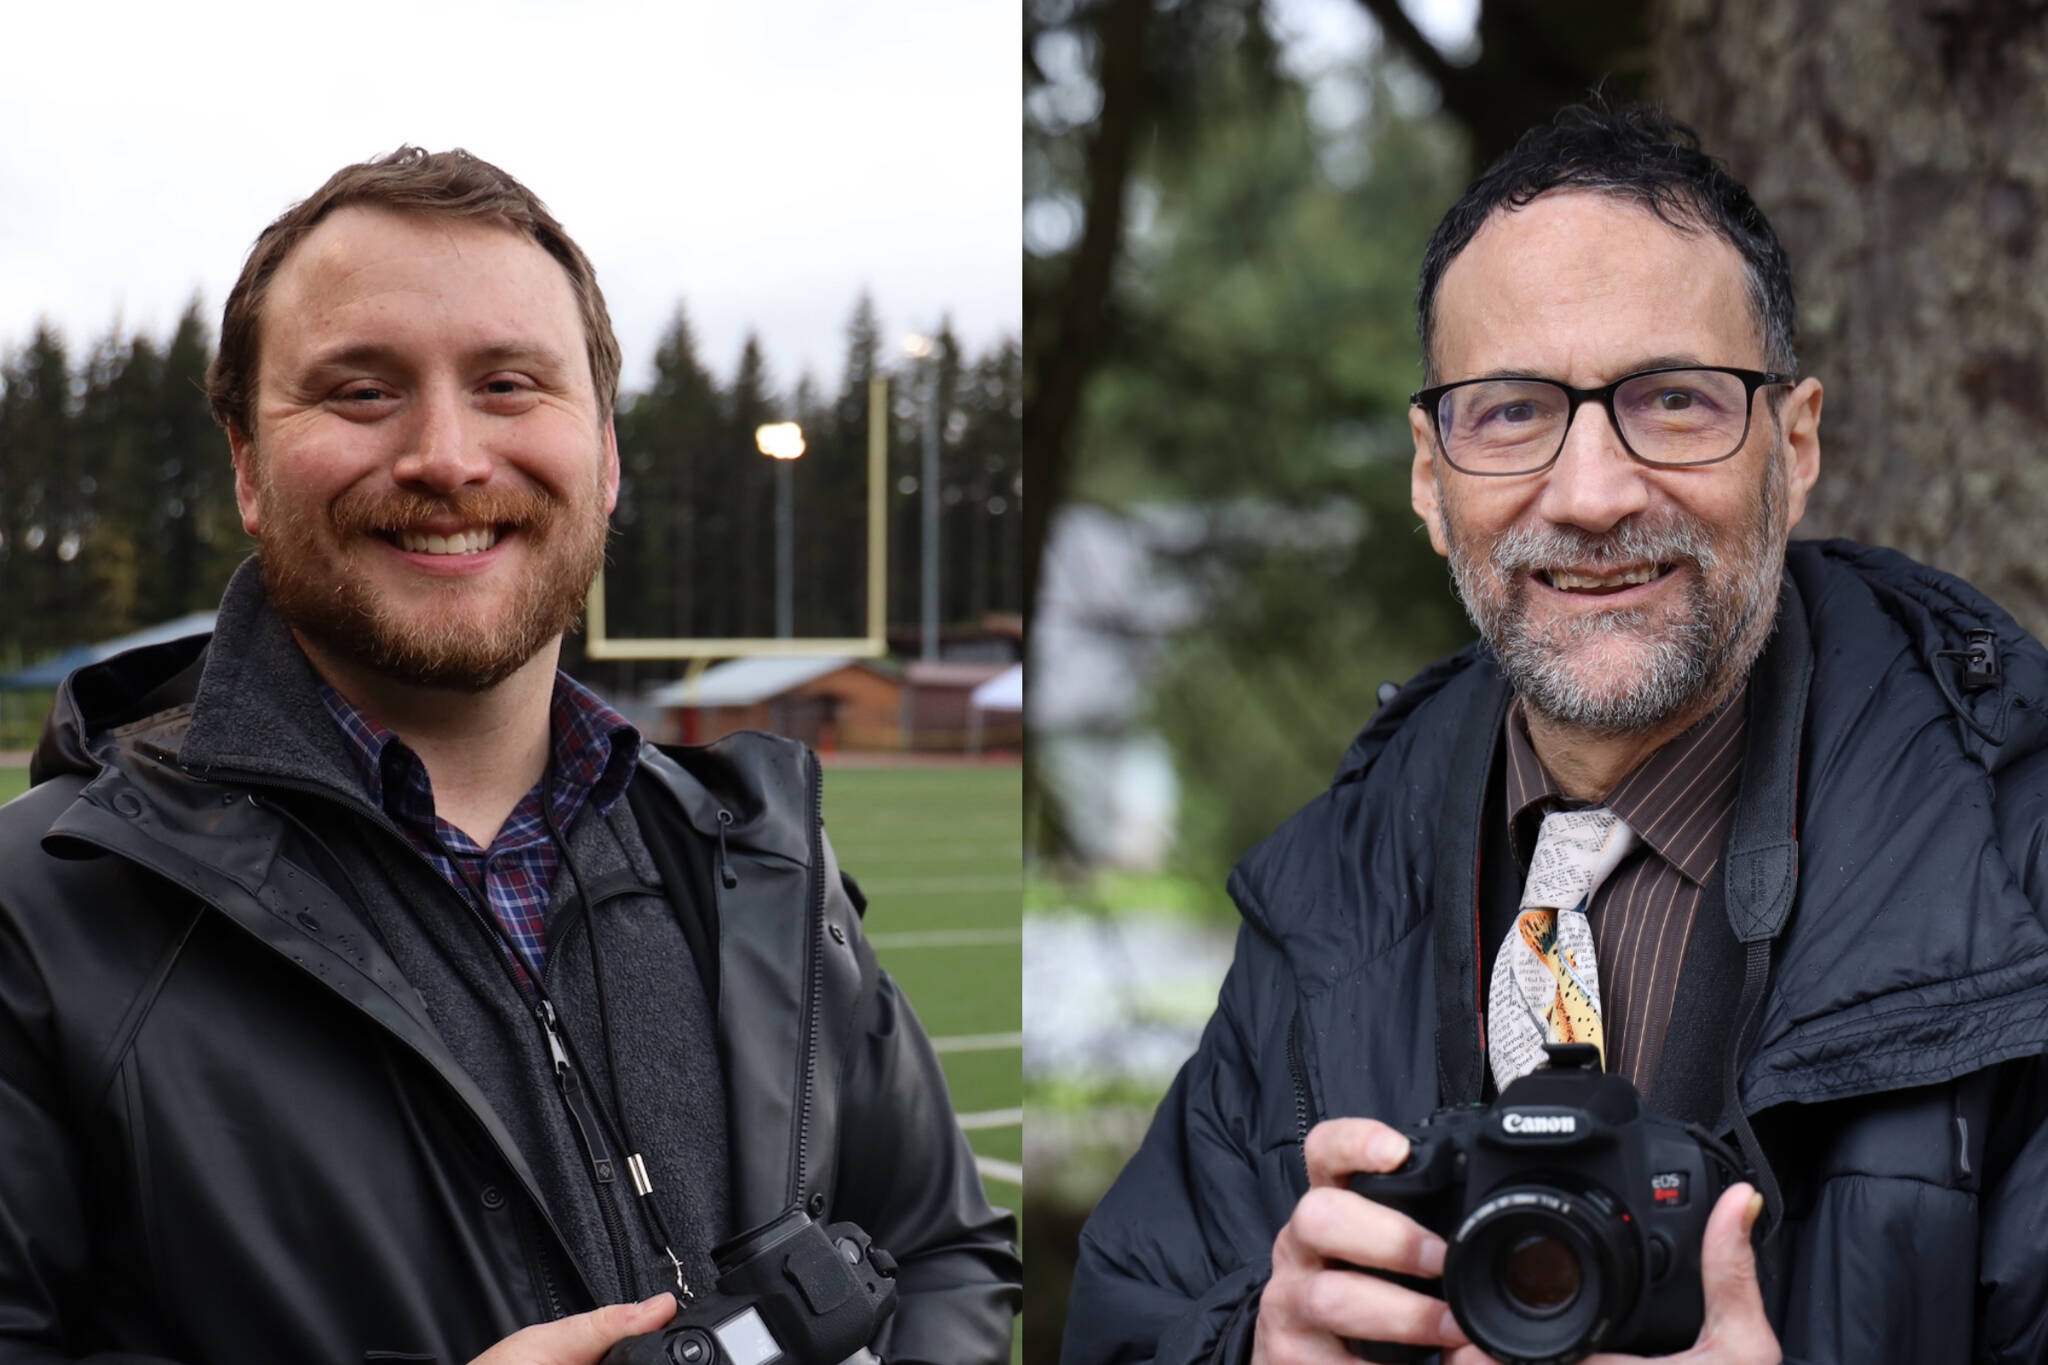 Outgoing Juneau Empire Managing Editor Ben Hohenstatt (left) will be succeeded by reporter Mark Sabbatini (right) after five years to accept a job with the Alaska State Ombudsman. (Clarise Larson / Juneau Empire)